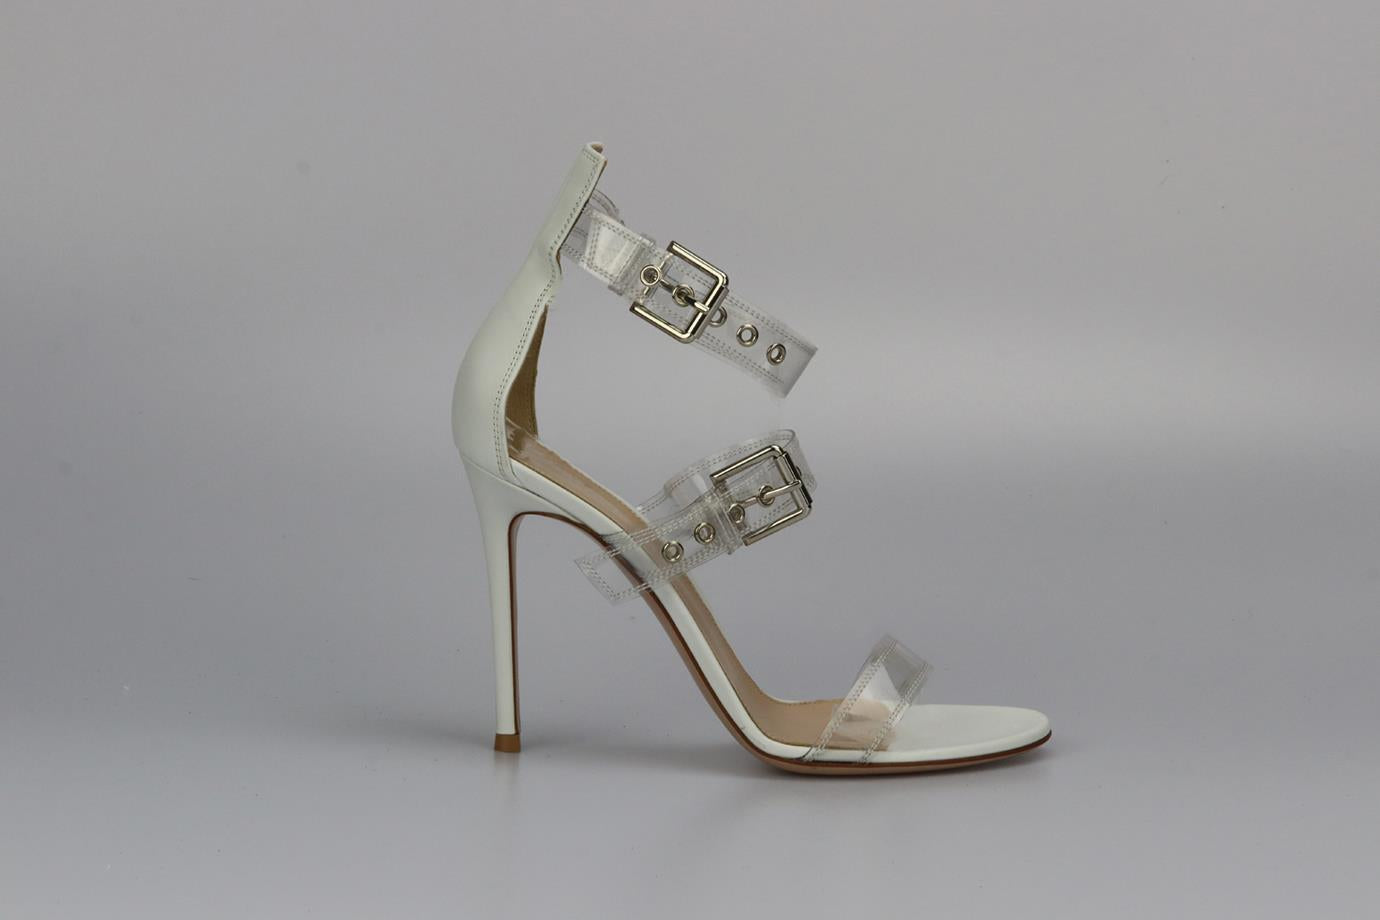 GIANVITO ROSSI BUCKLE DETAIL PVC AND LEATHER SANDALS EU 38.5 UK 5.5 US 8.5